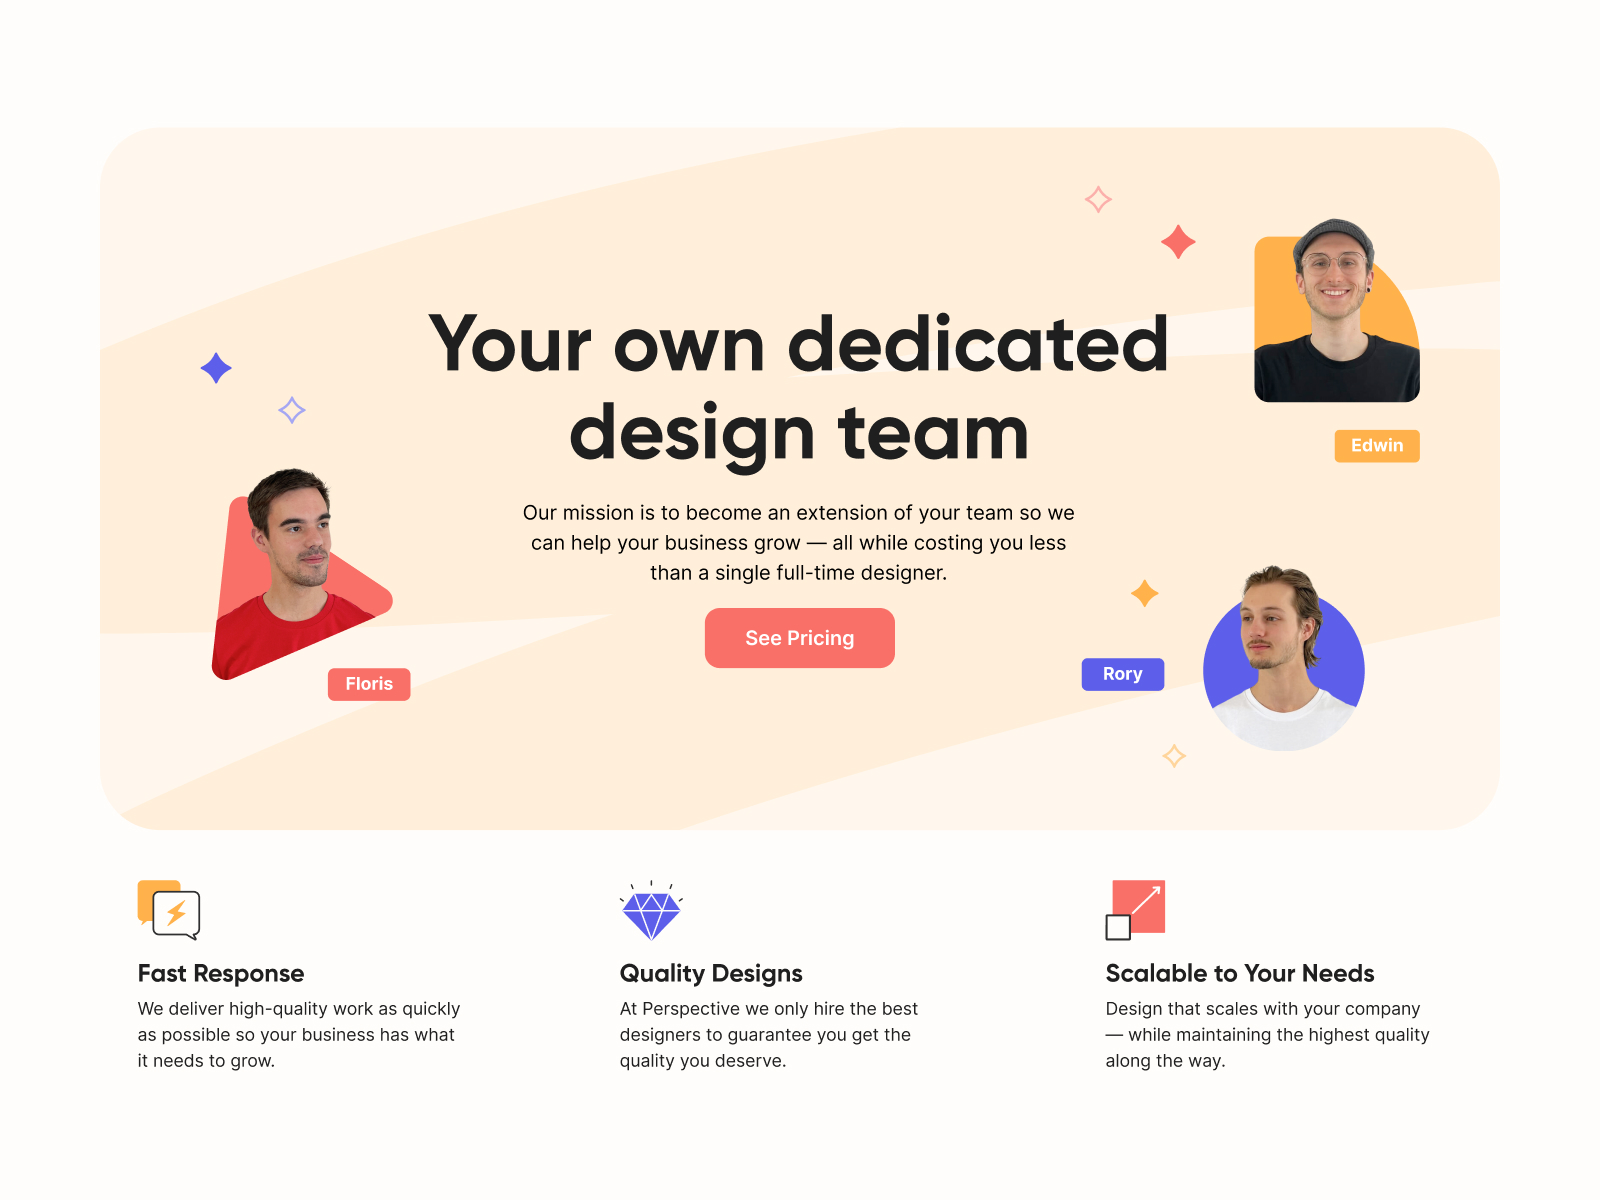 Your own dedicated design team